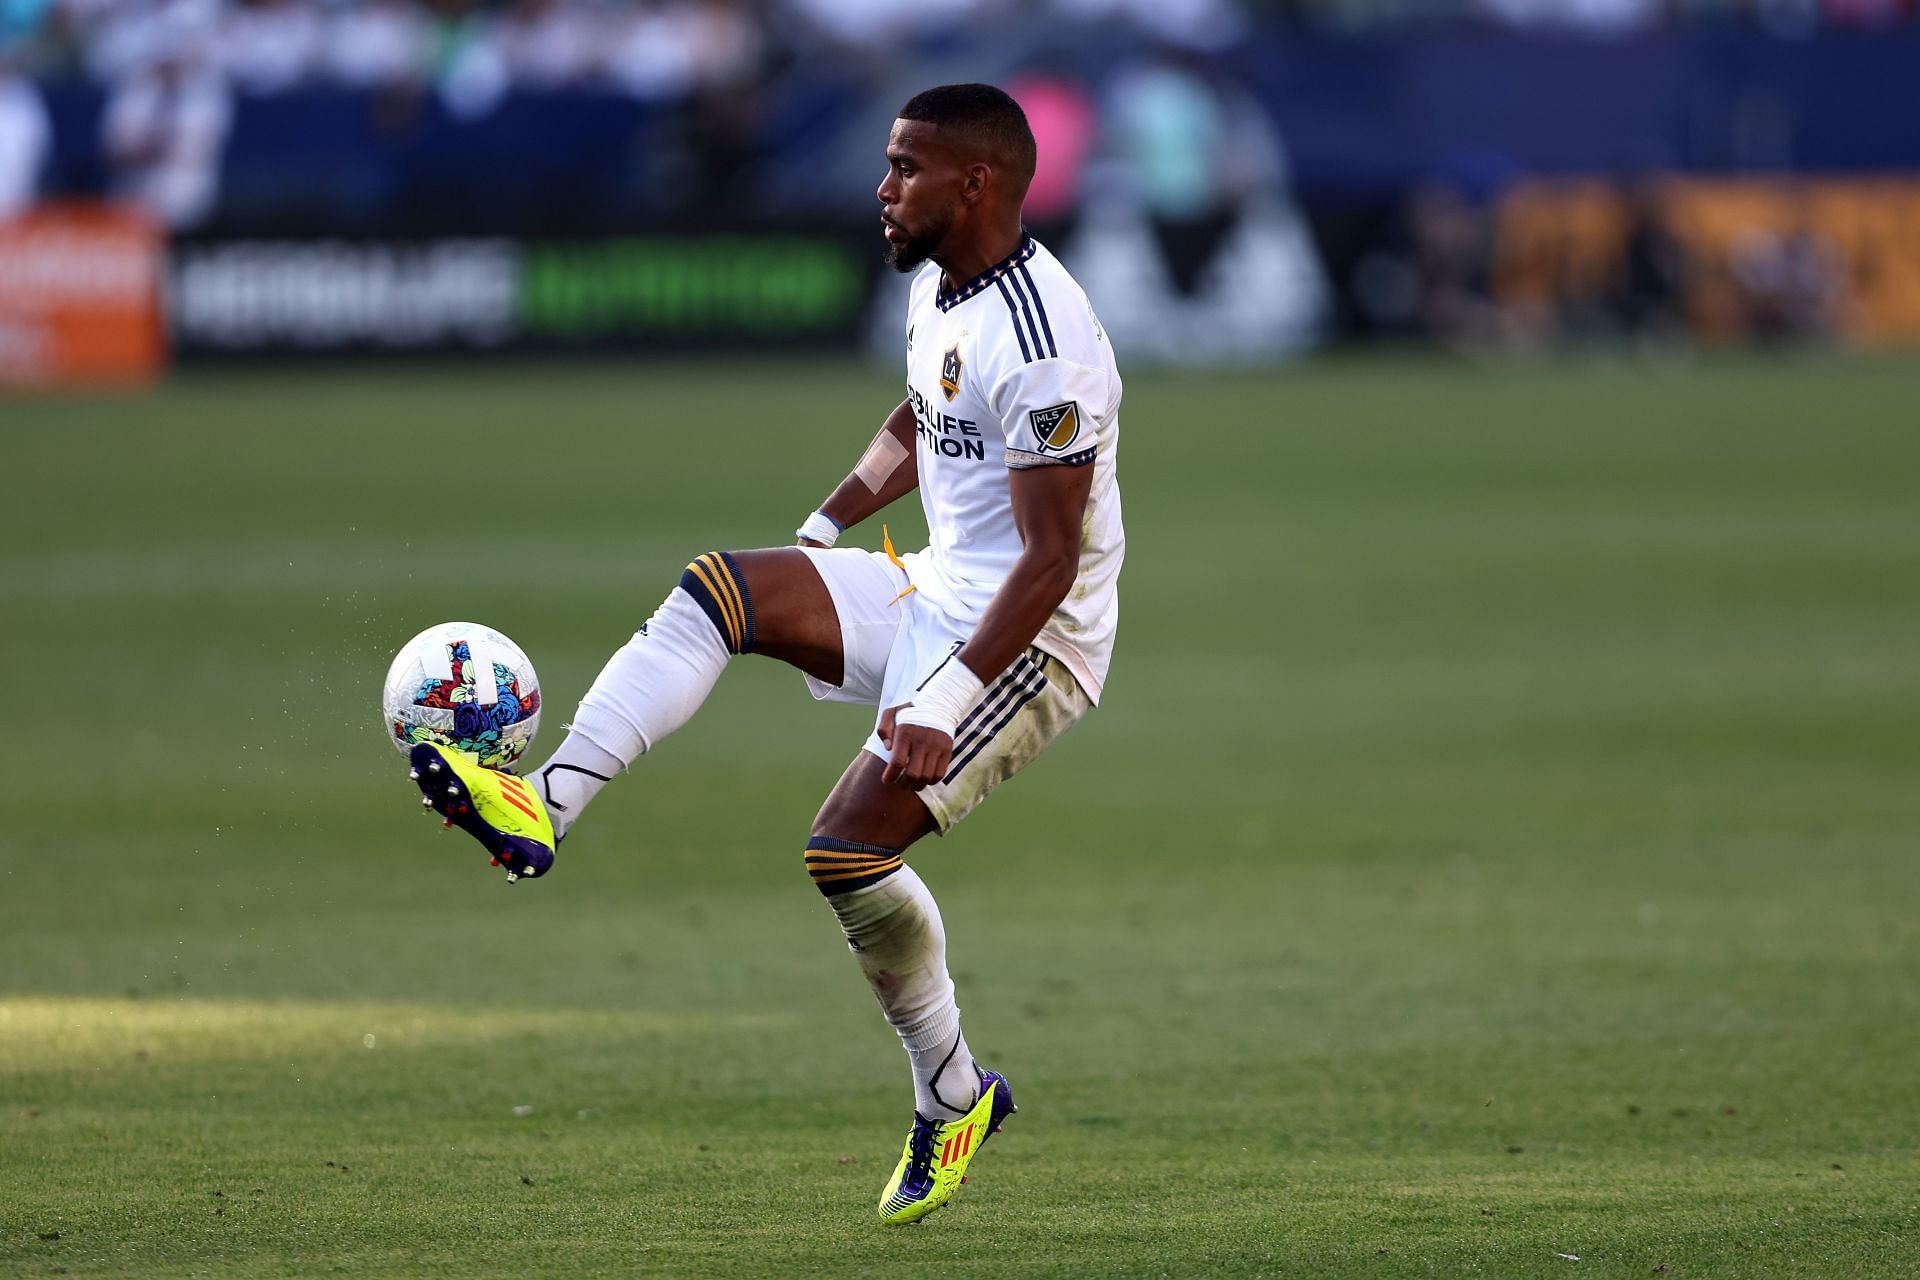 Los Angeles Galaxy take on Vancouver Whitecaps this weekend